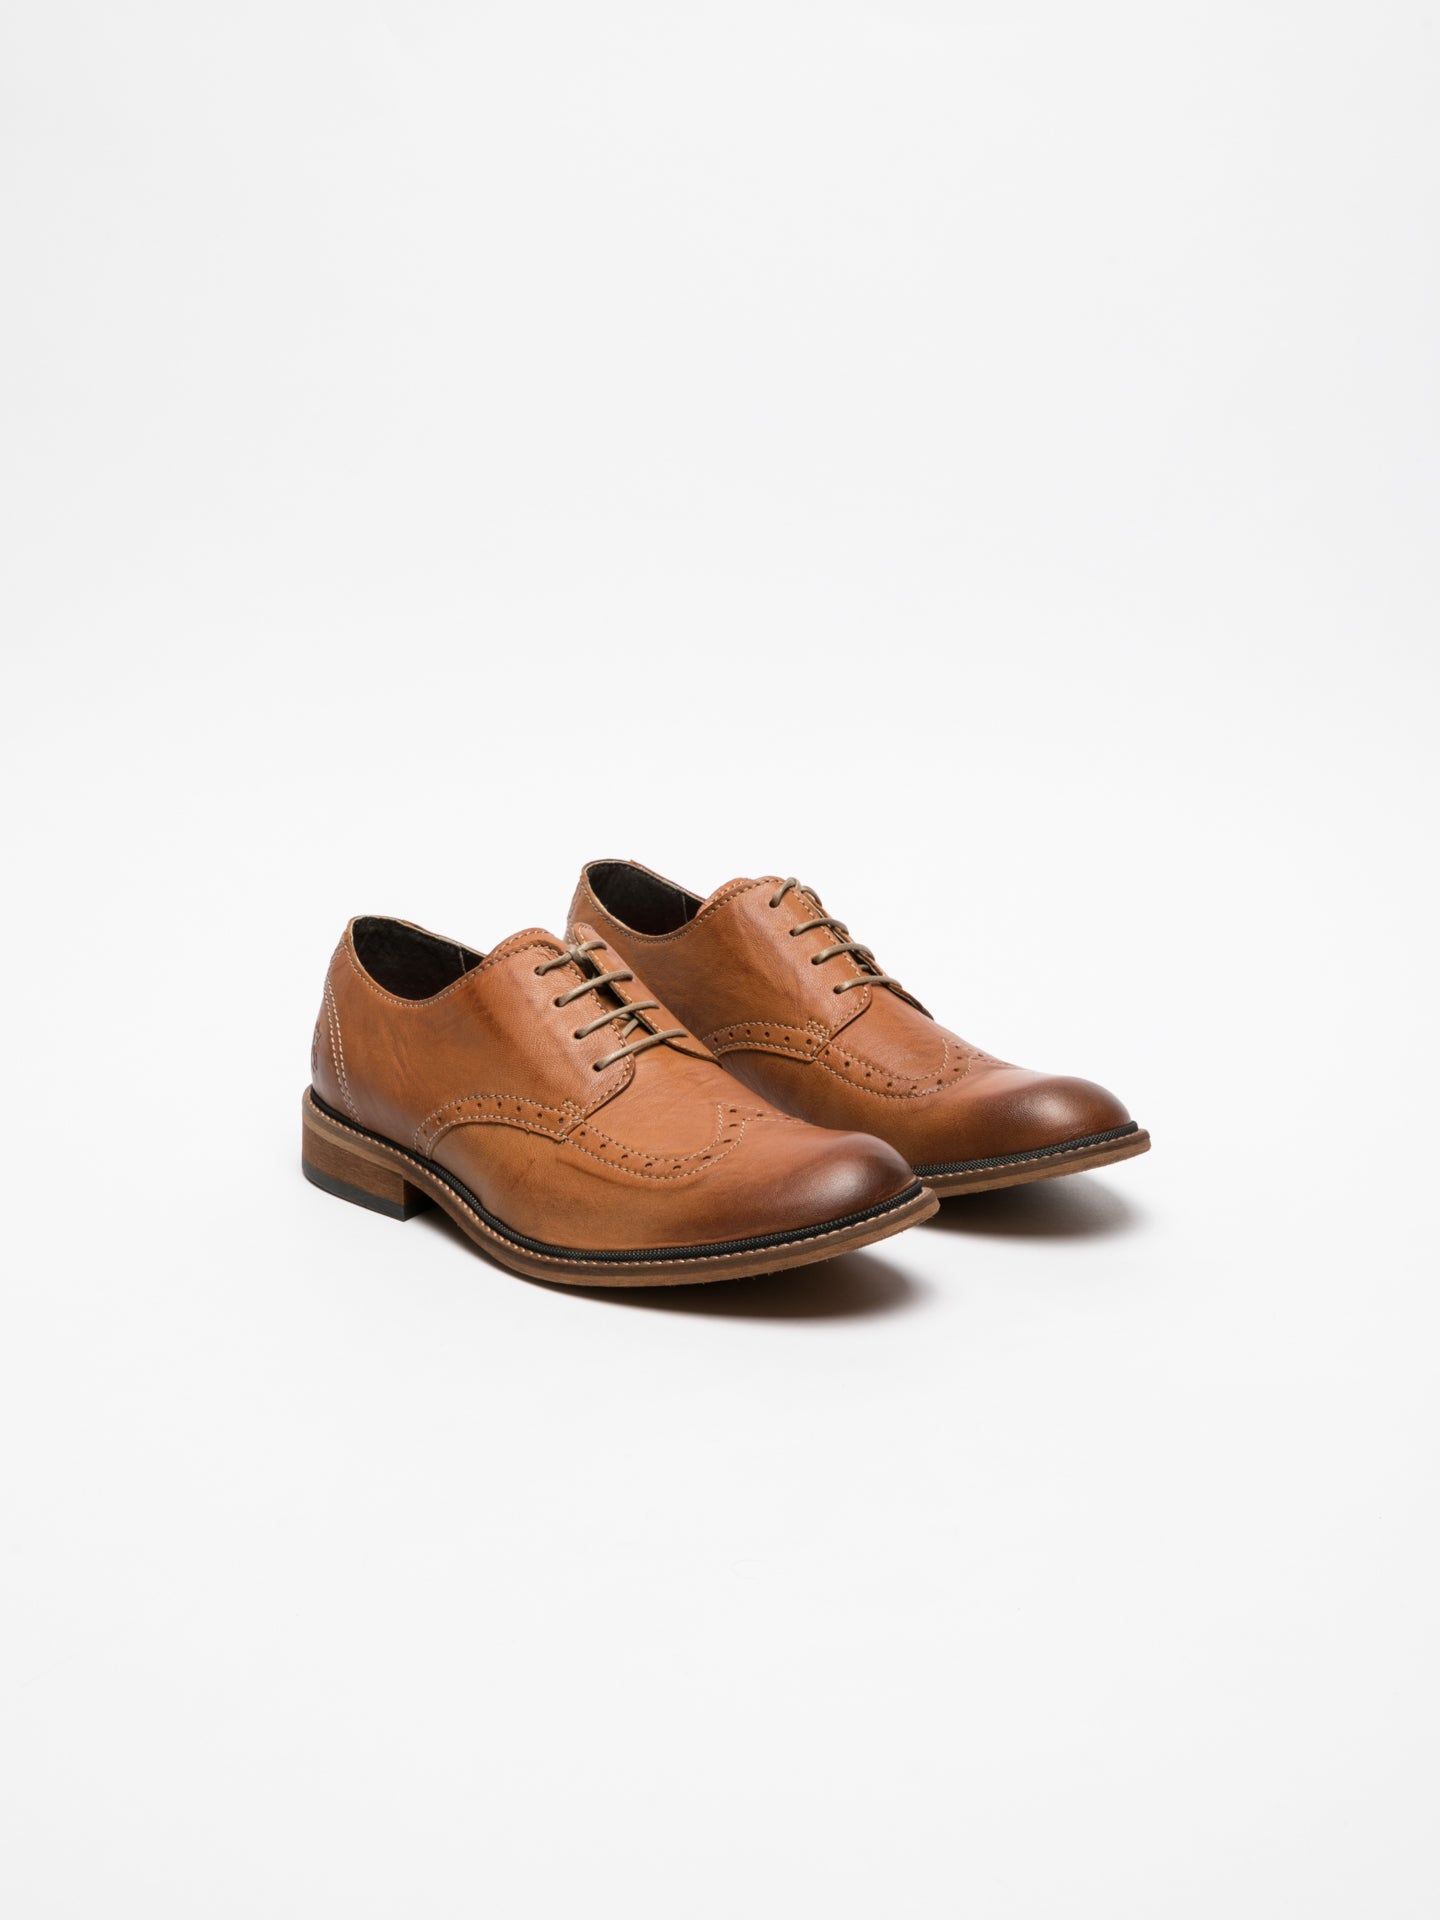 Fly London Chocolate Brown Derby Shoes